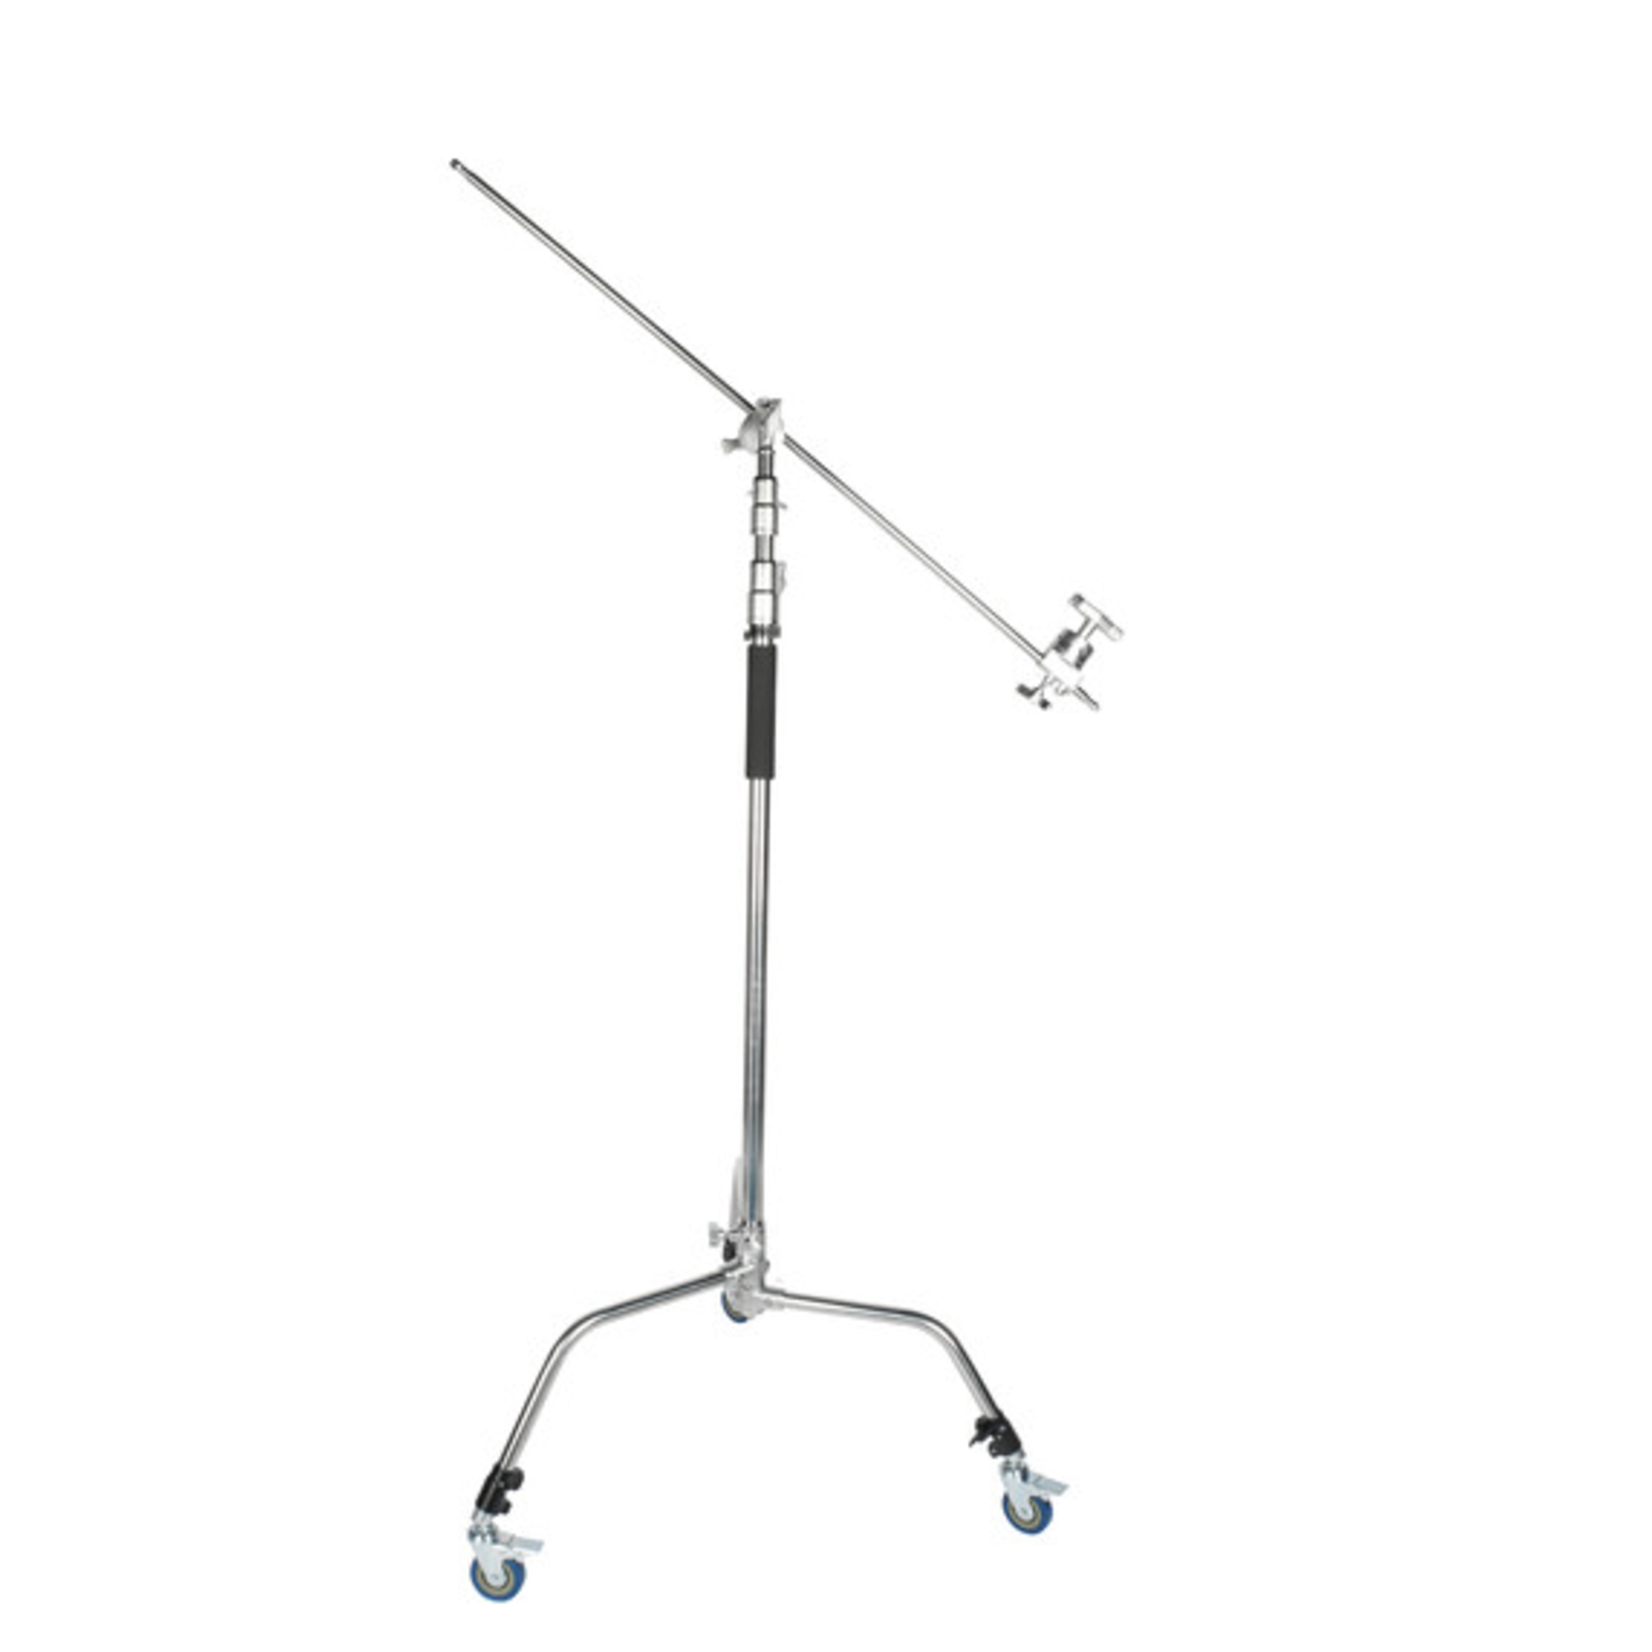 Sirui Sirui C-STAND-02 C-Stand with Boom Arm, Casters, and Sandbag (Chrome)